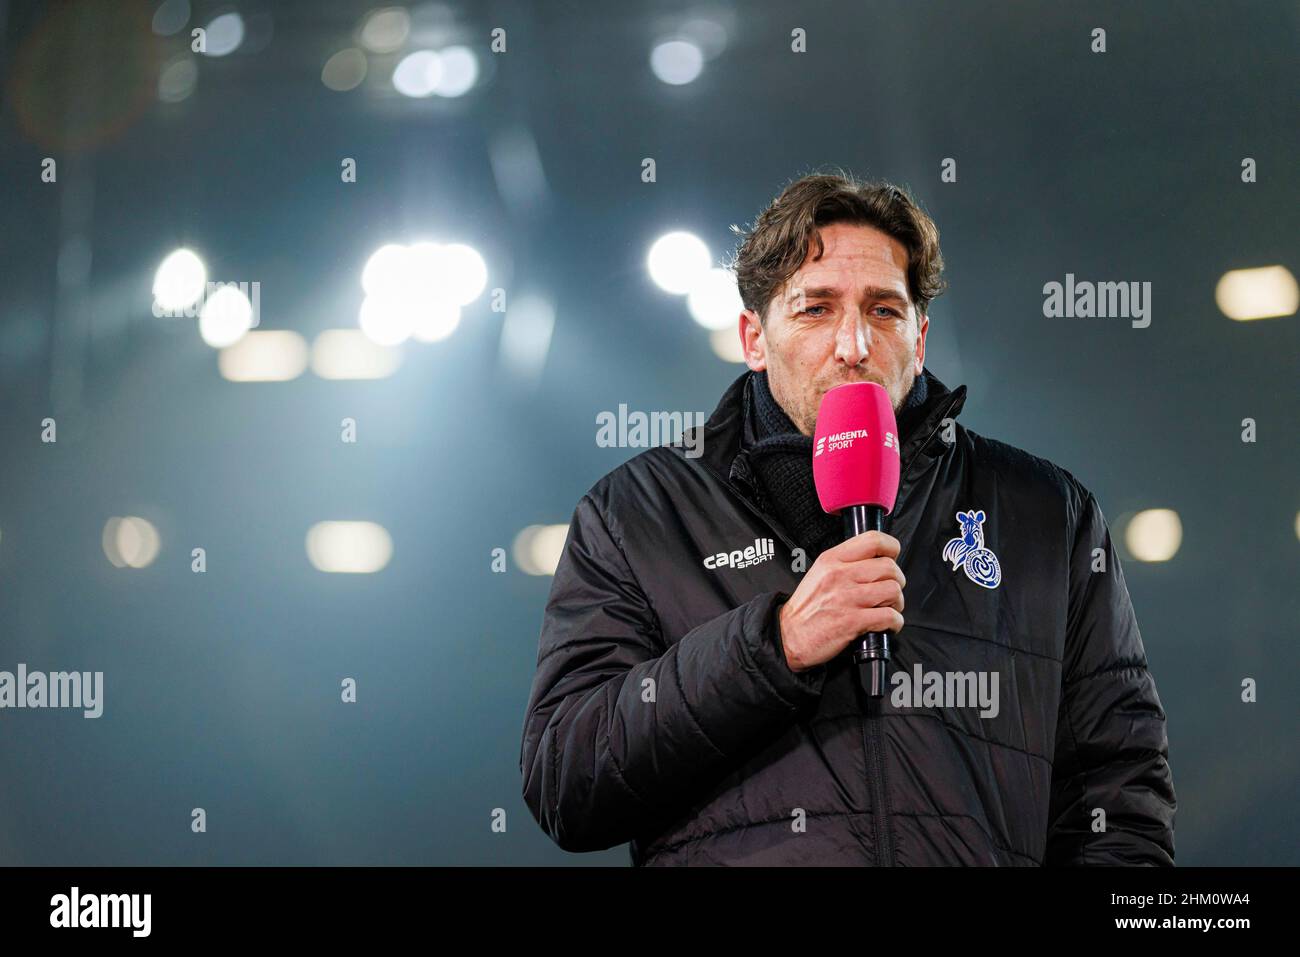 Telekom Magenta Sport High Resolution Stock Photography and Images - Alamy